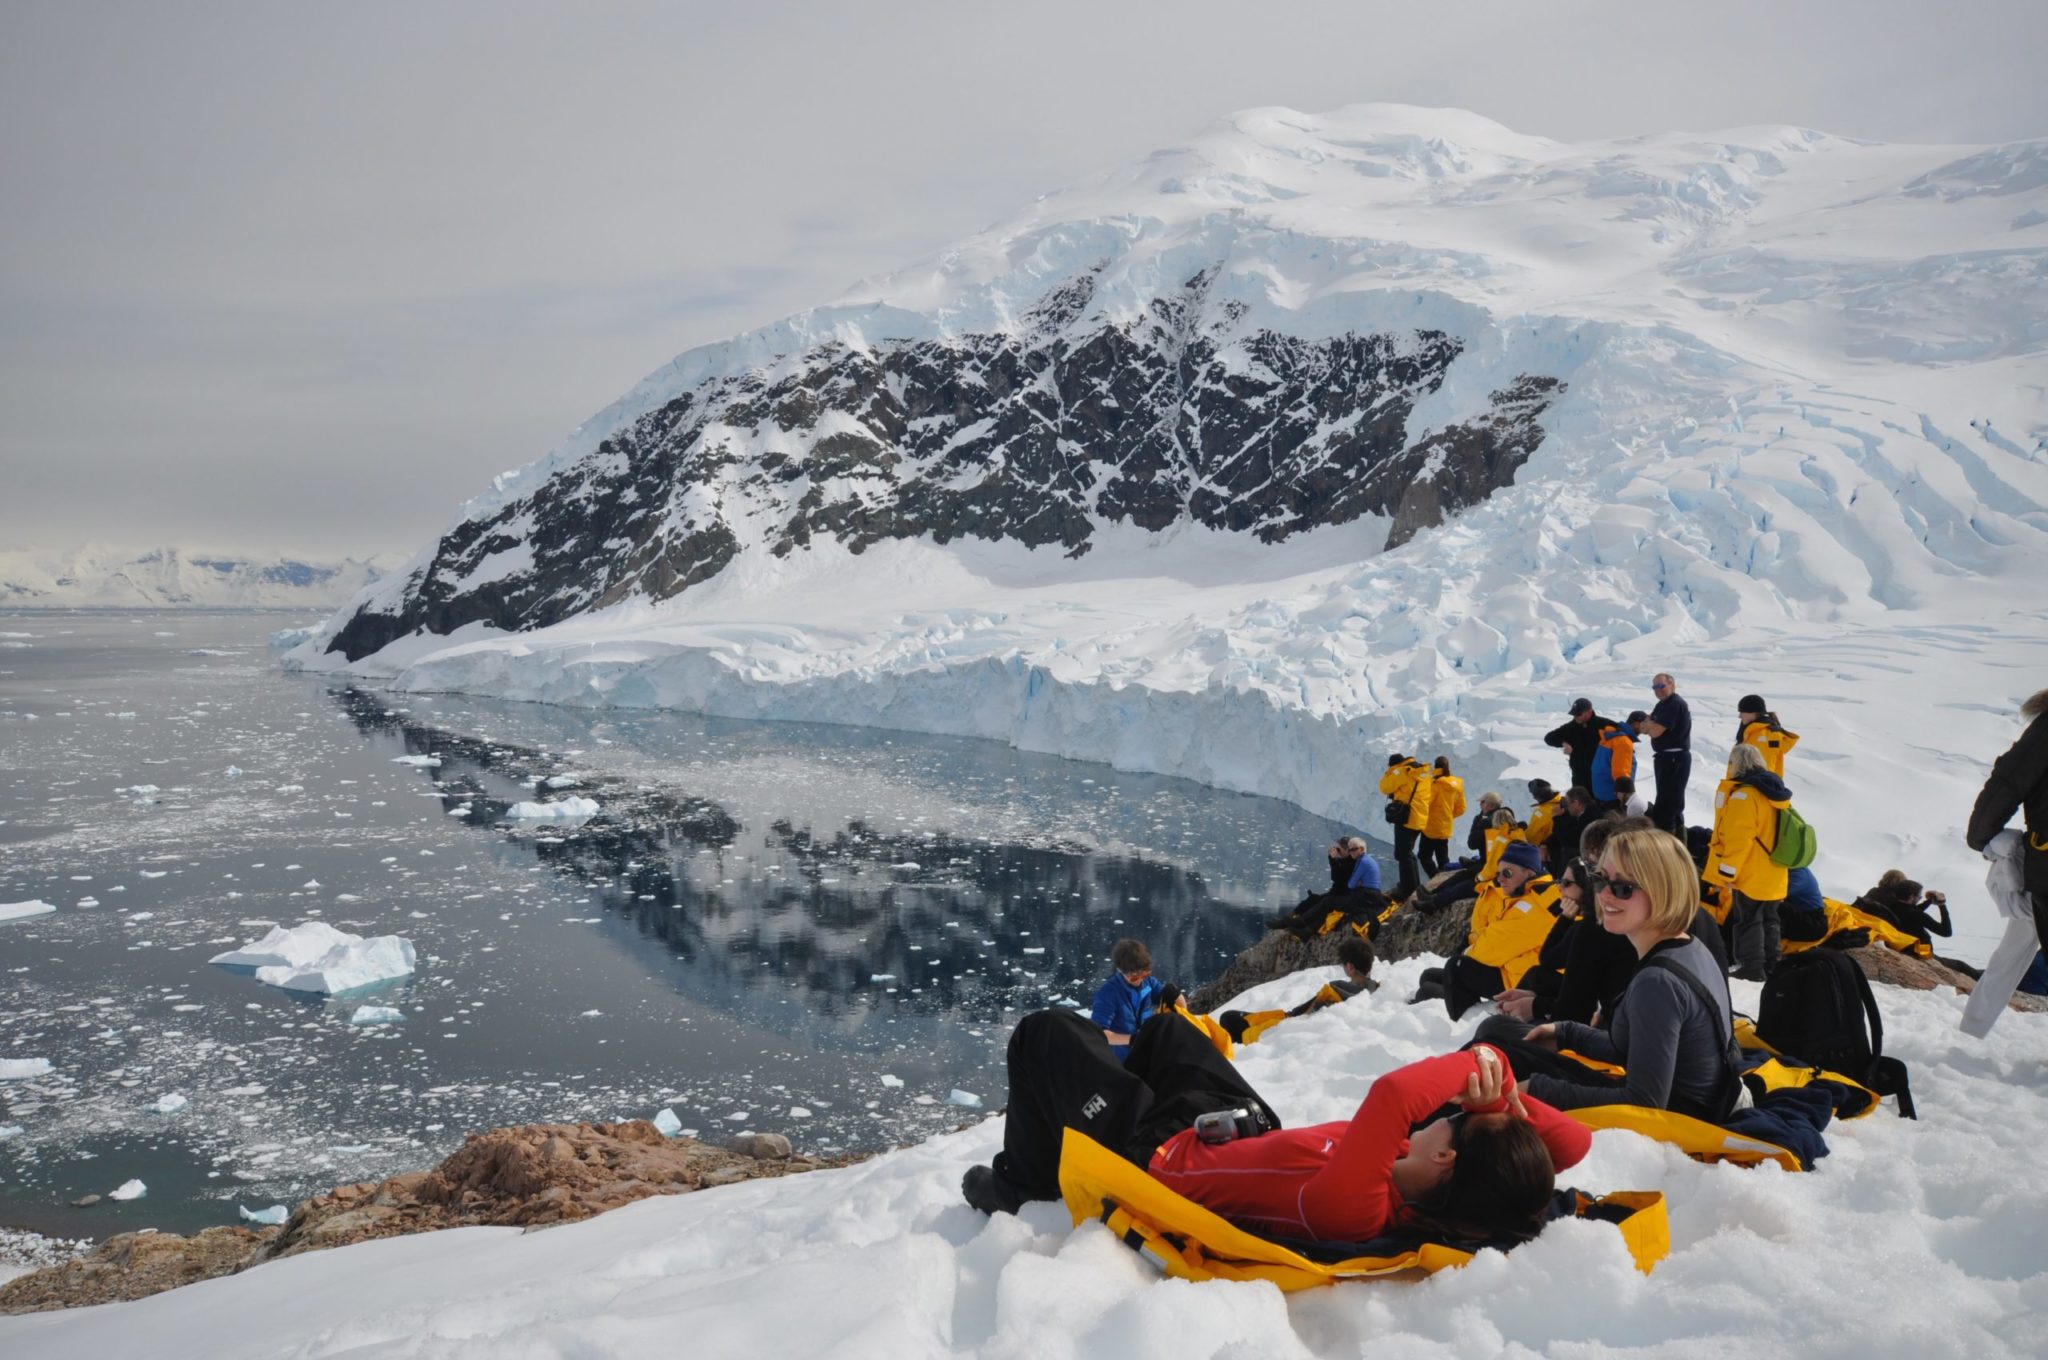 2. Glacier trekking - what is it and which parts of the world can you do it